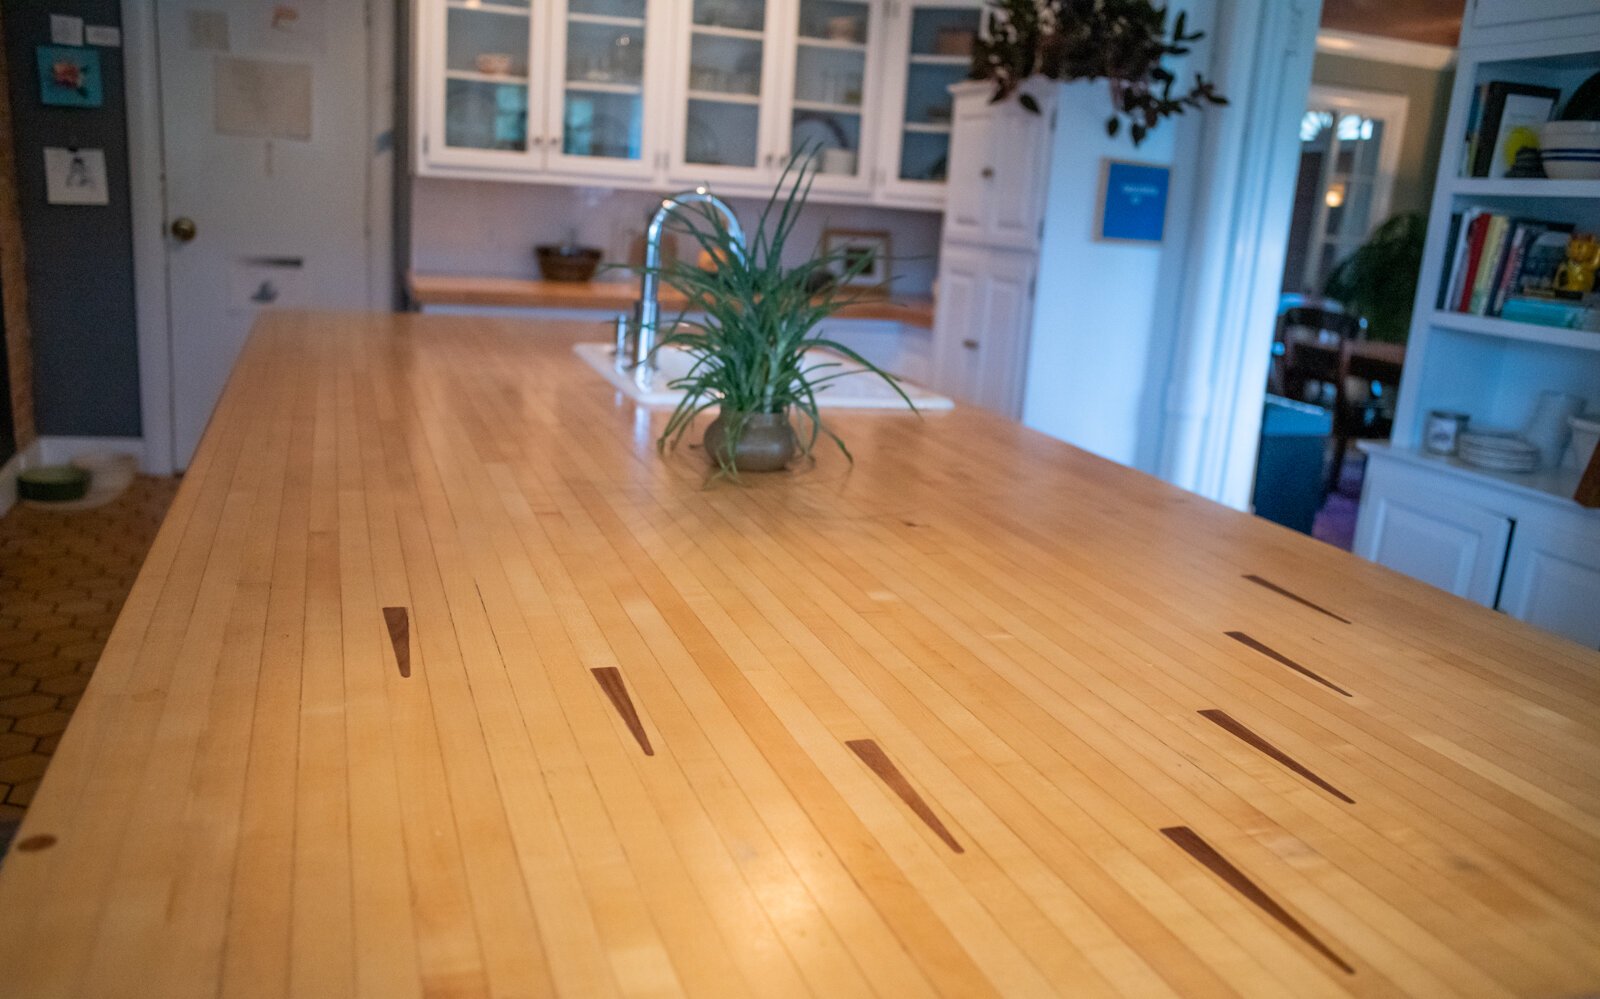 The kitchen table was created using reclaimed bowling alley wood.